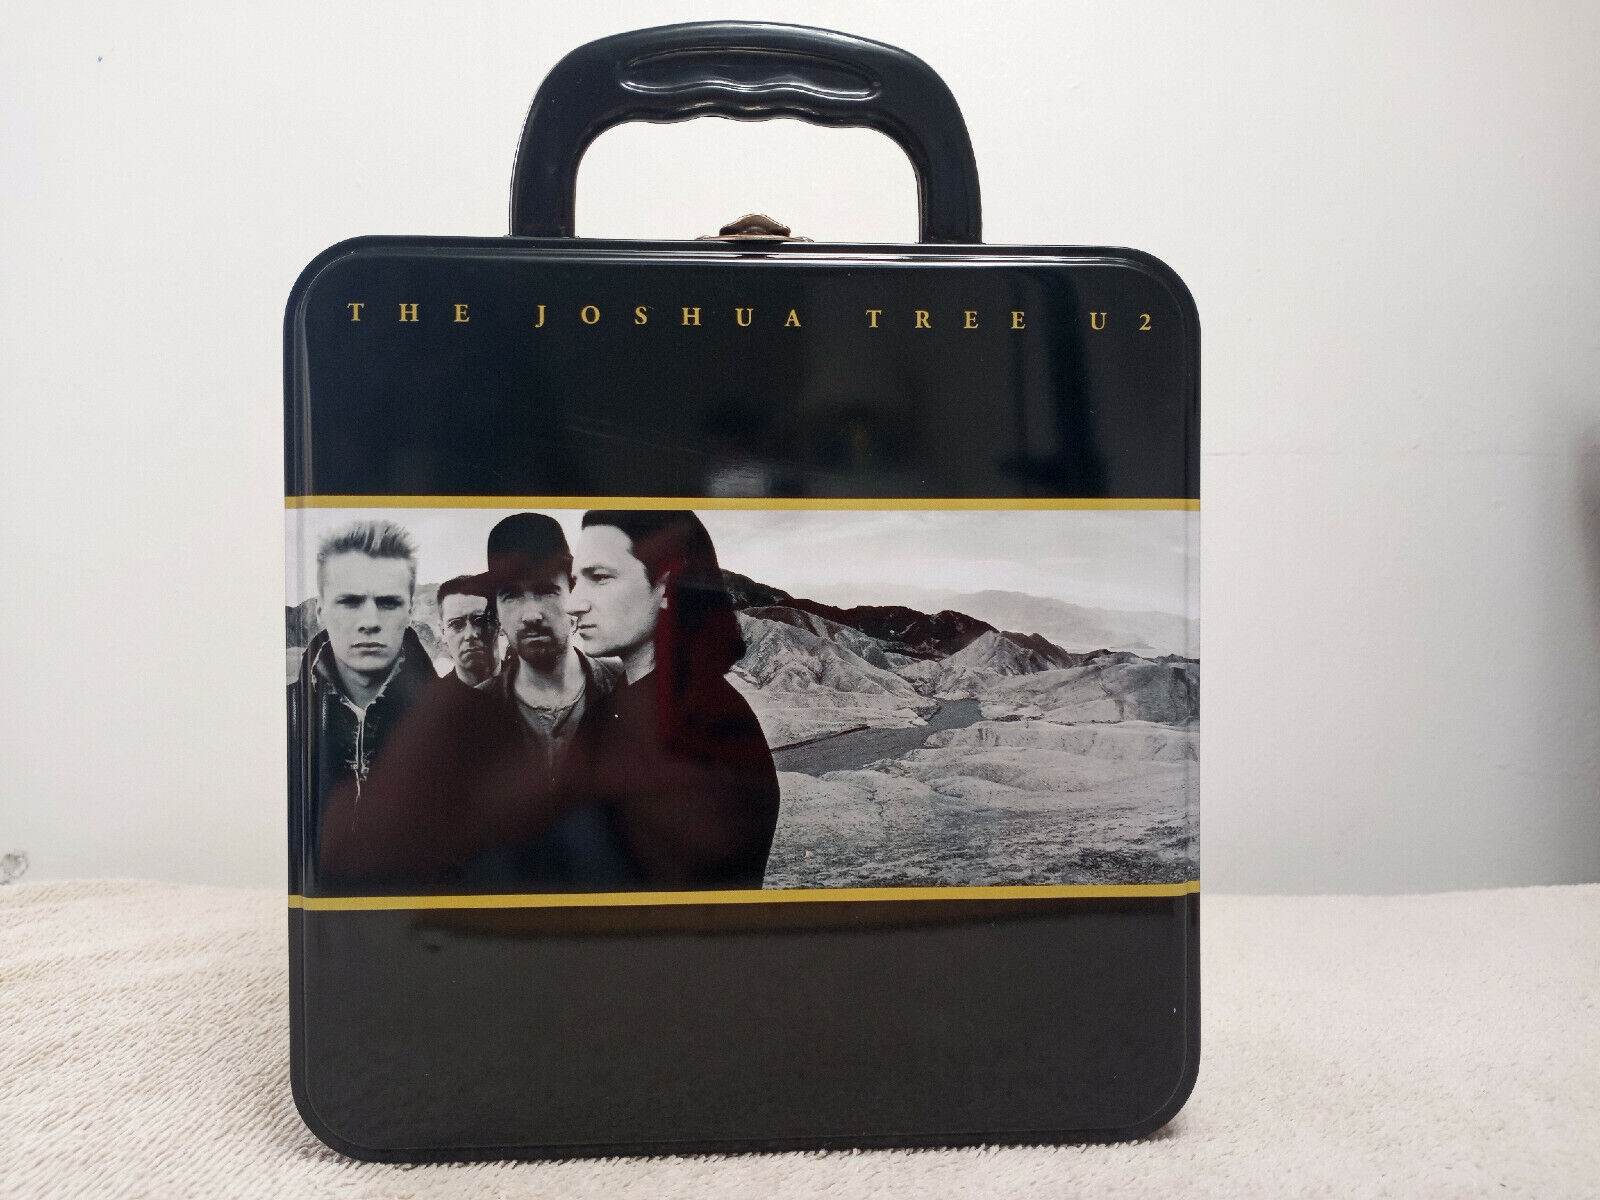 U2 The Joshua Tree Square Tin Tote by Live Nation Lunch Box